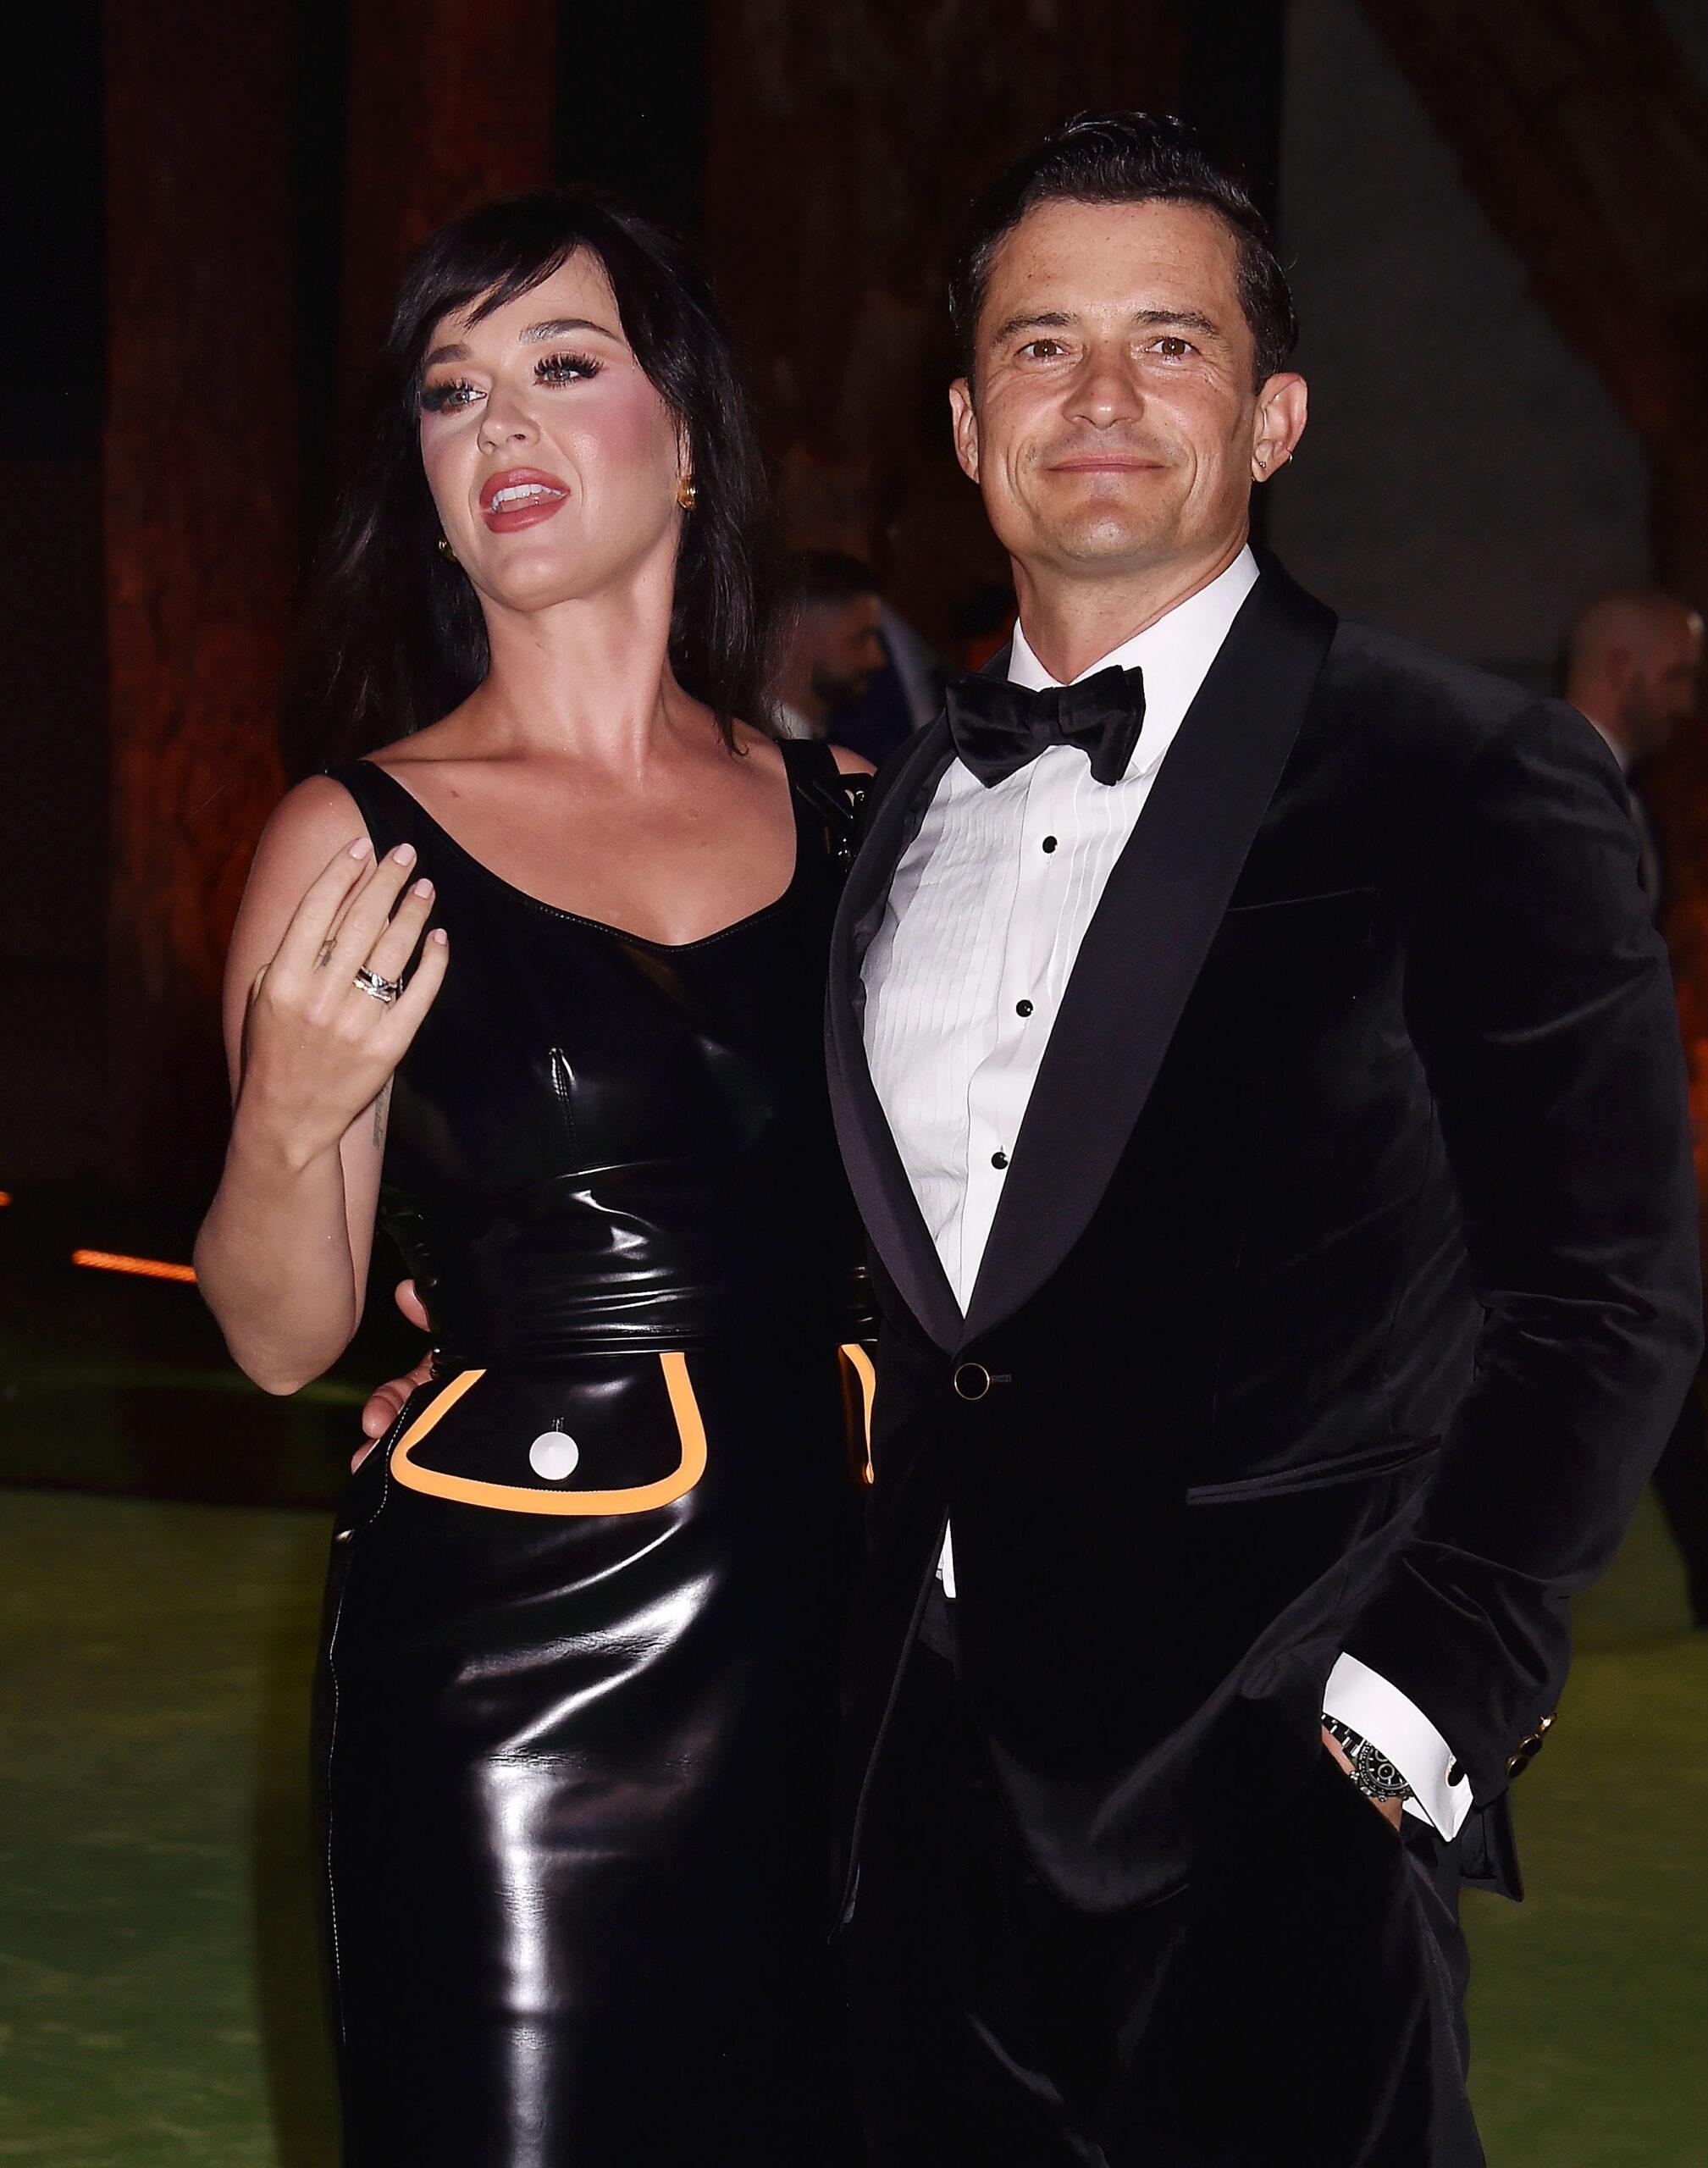 Katy Perry at The Academy Museum Of Motion Pictures Opening Gala - Arrivals